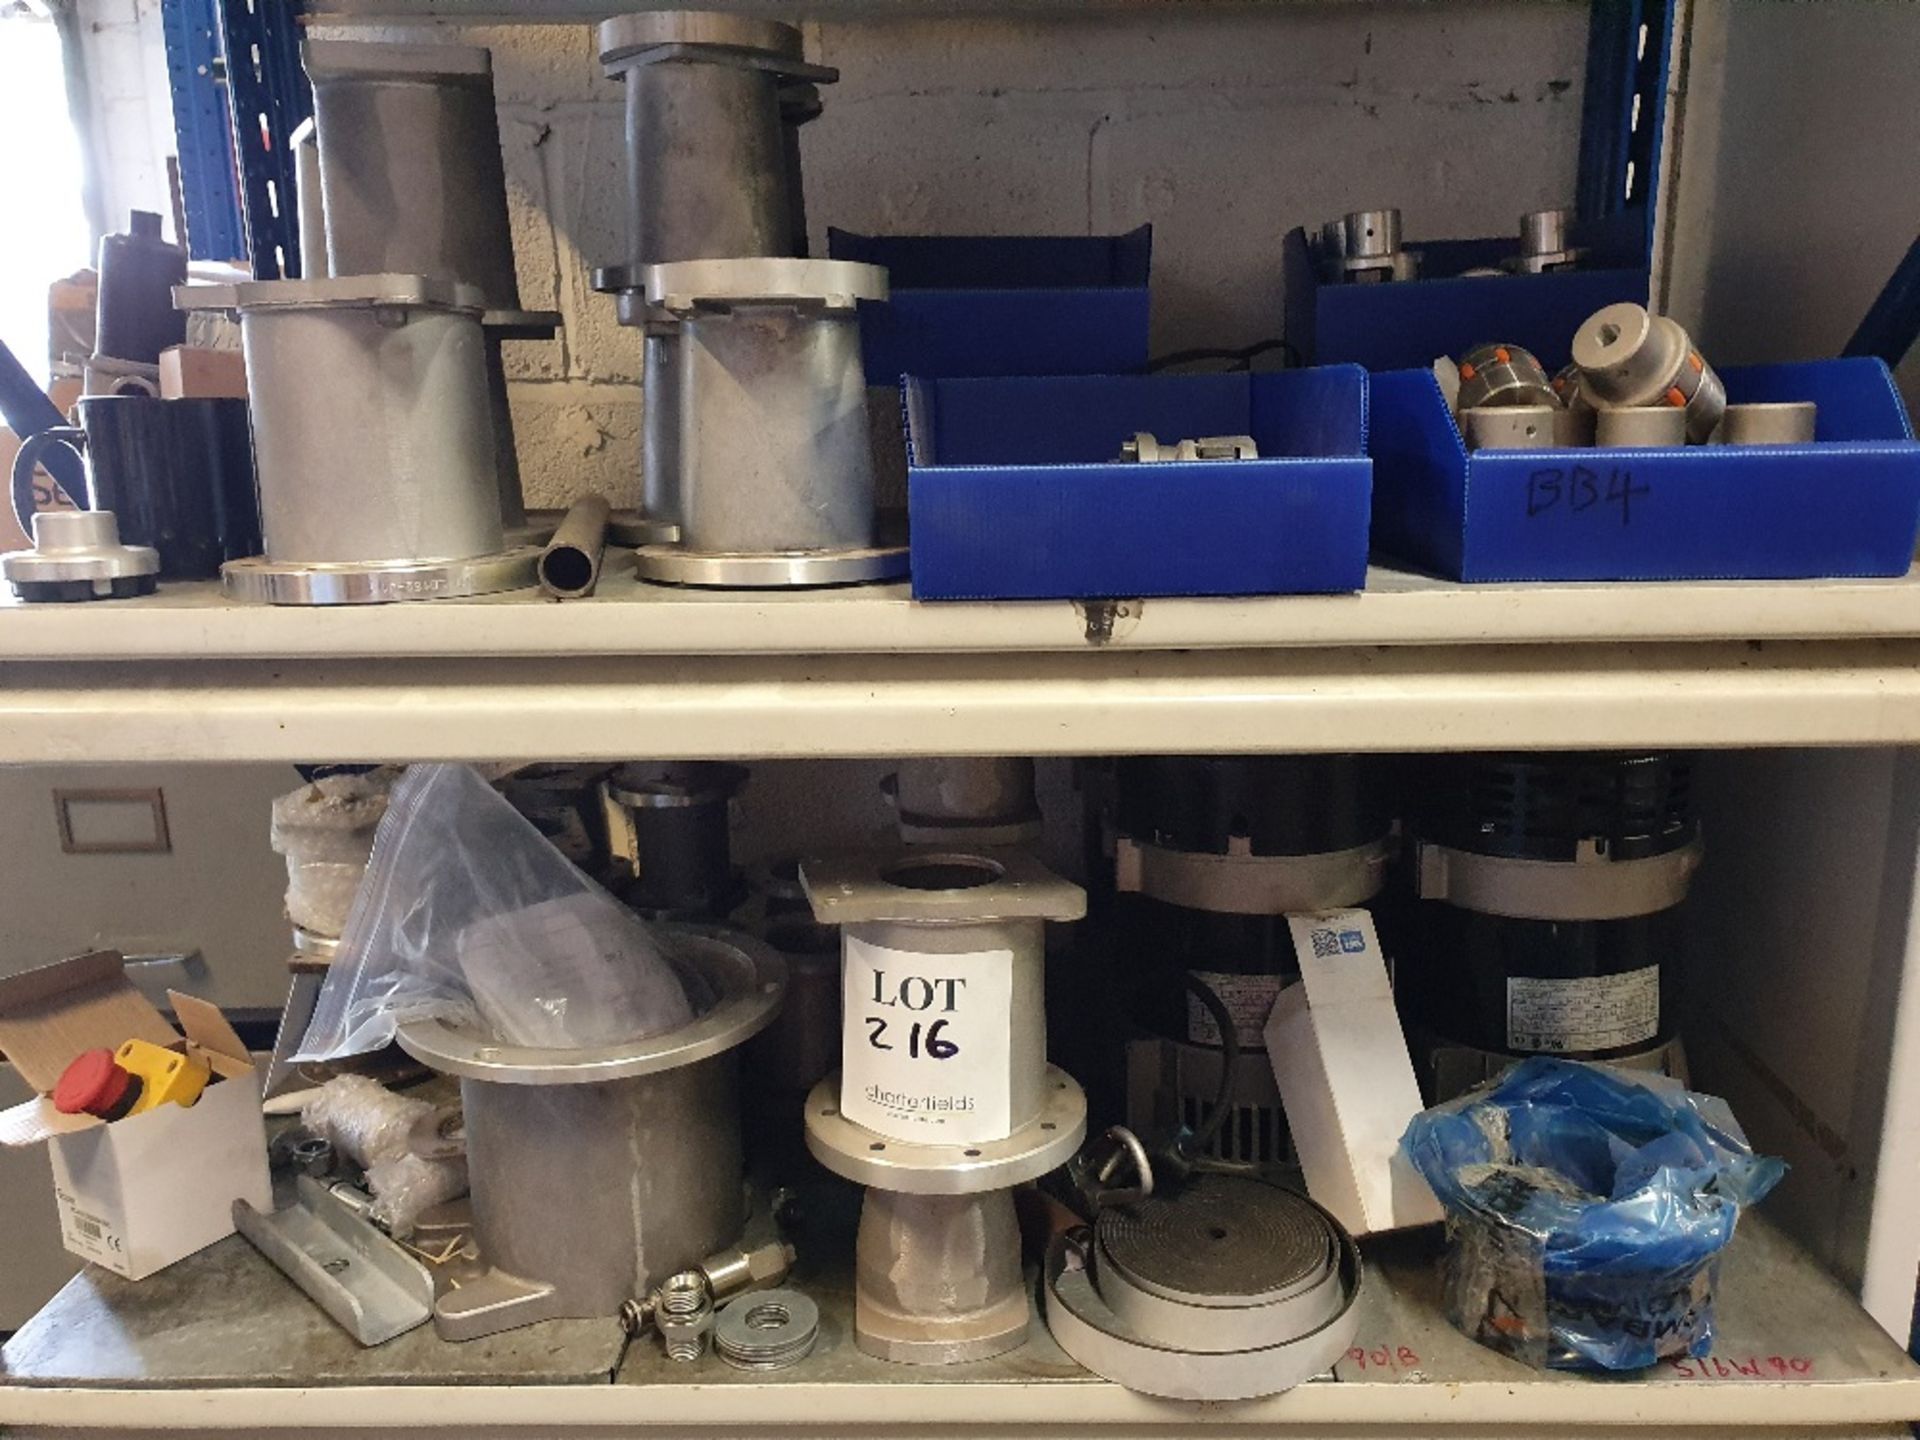 Shelf containing 4 - generators and various fittings